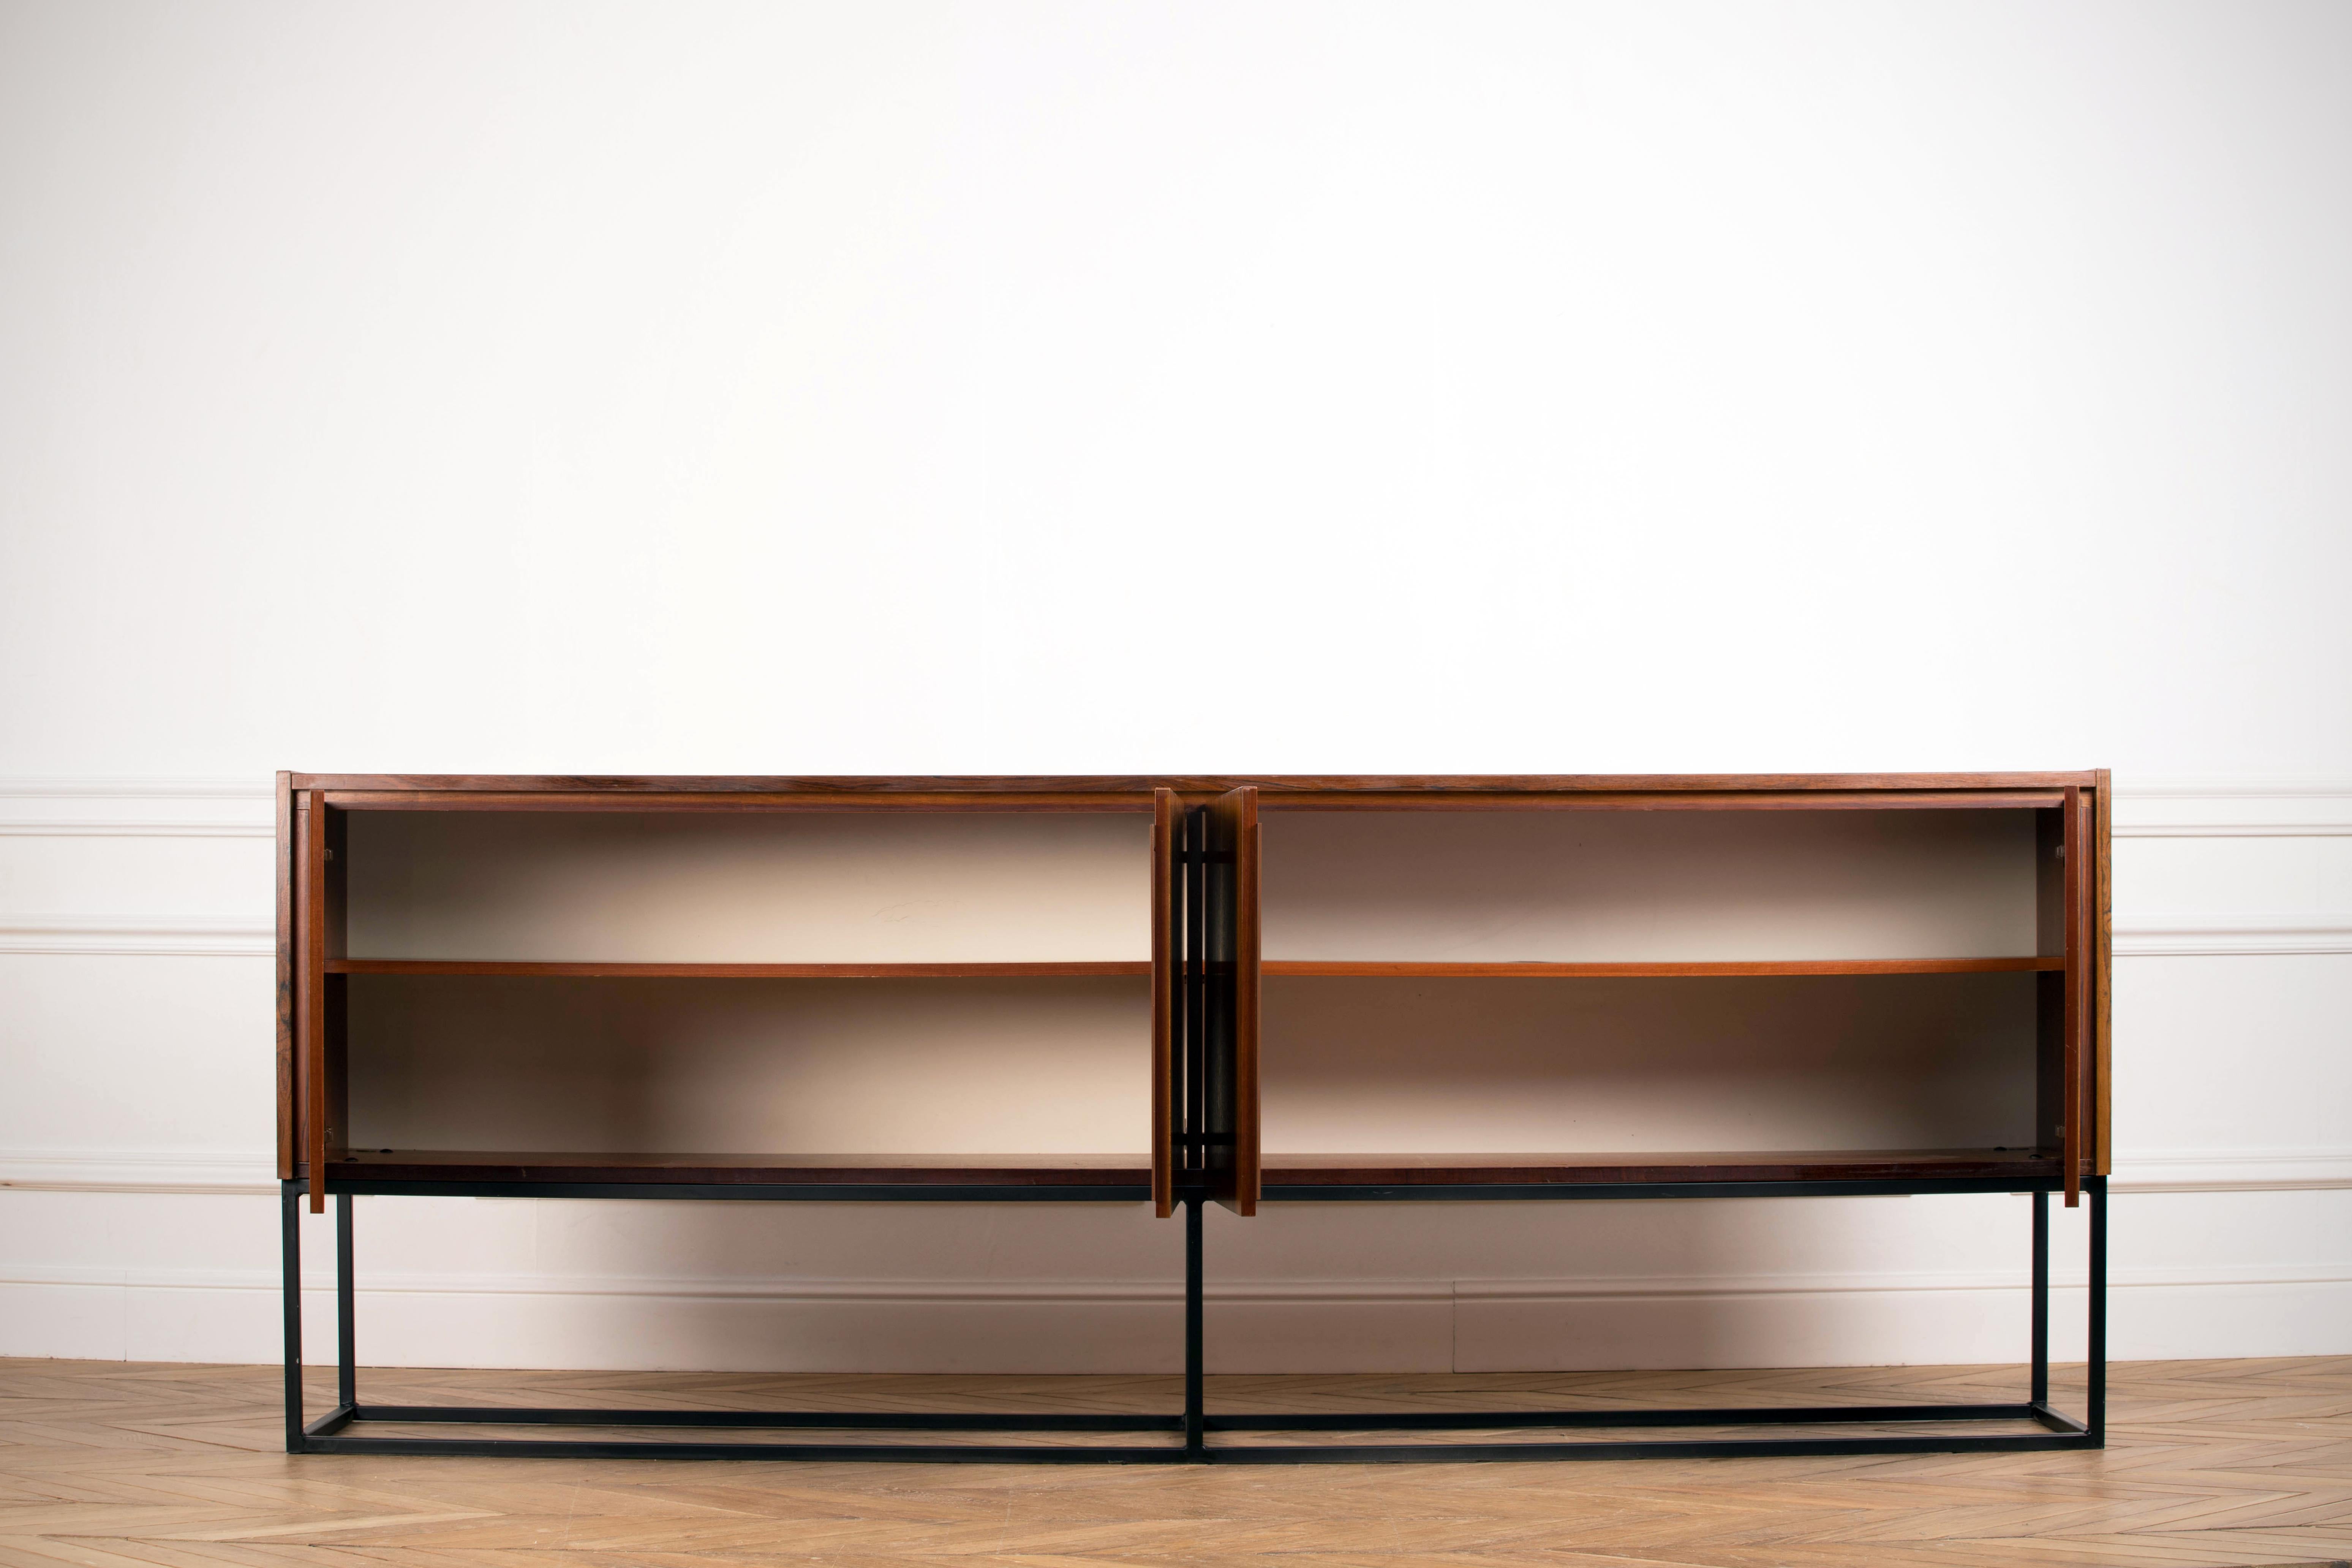 Midcentury rosewood sideboard from the 1960s. It is a shining example of the form and function synonymous with furniture of this era. It has is all ; well-built, great design and heaviness. Four doors hiding storage space. The minimal design and the